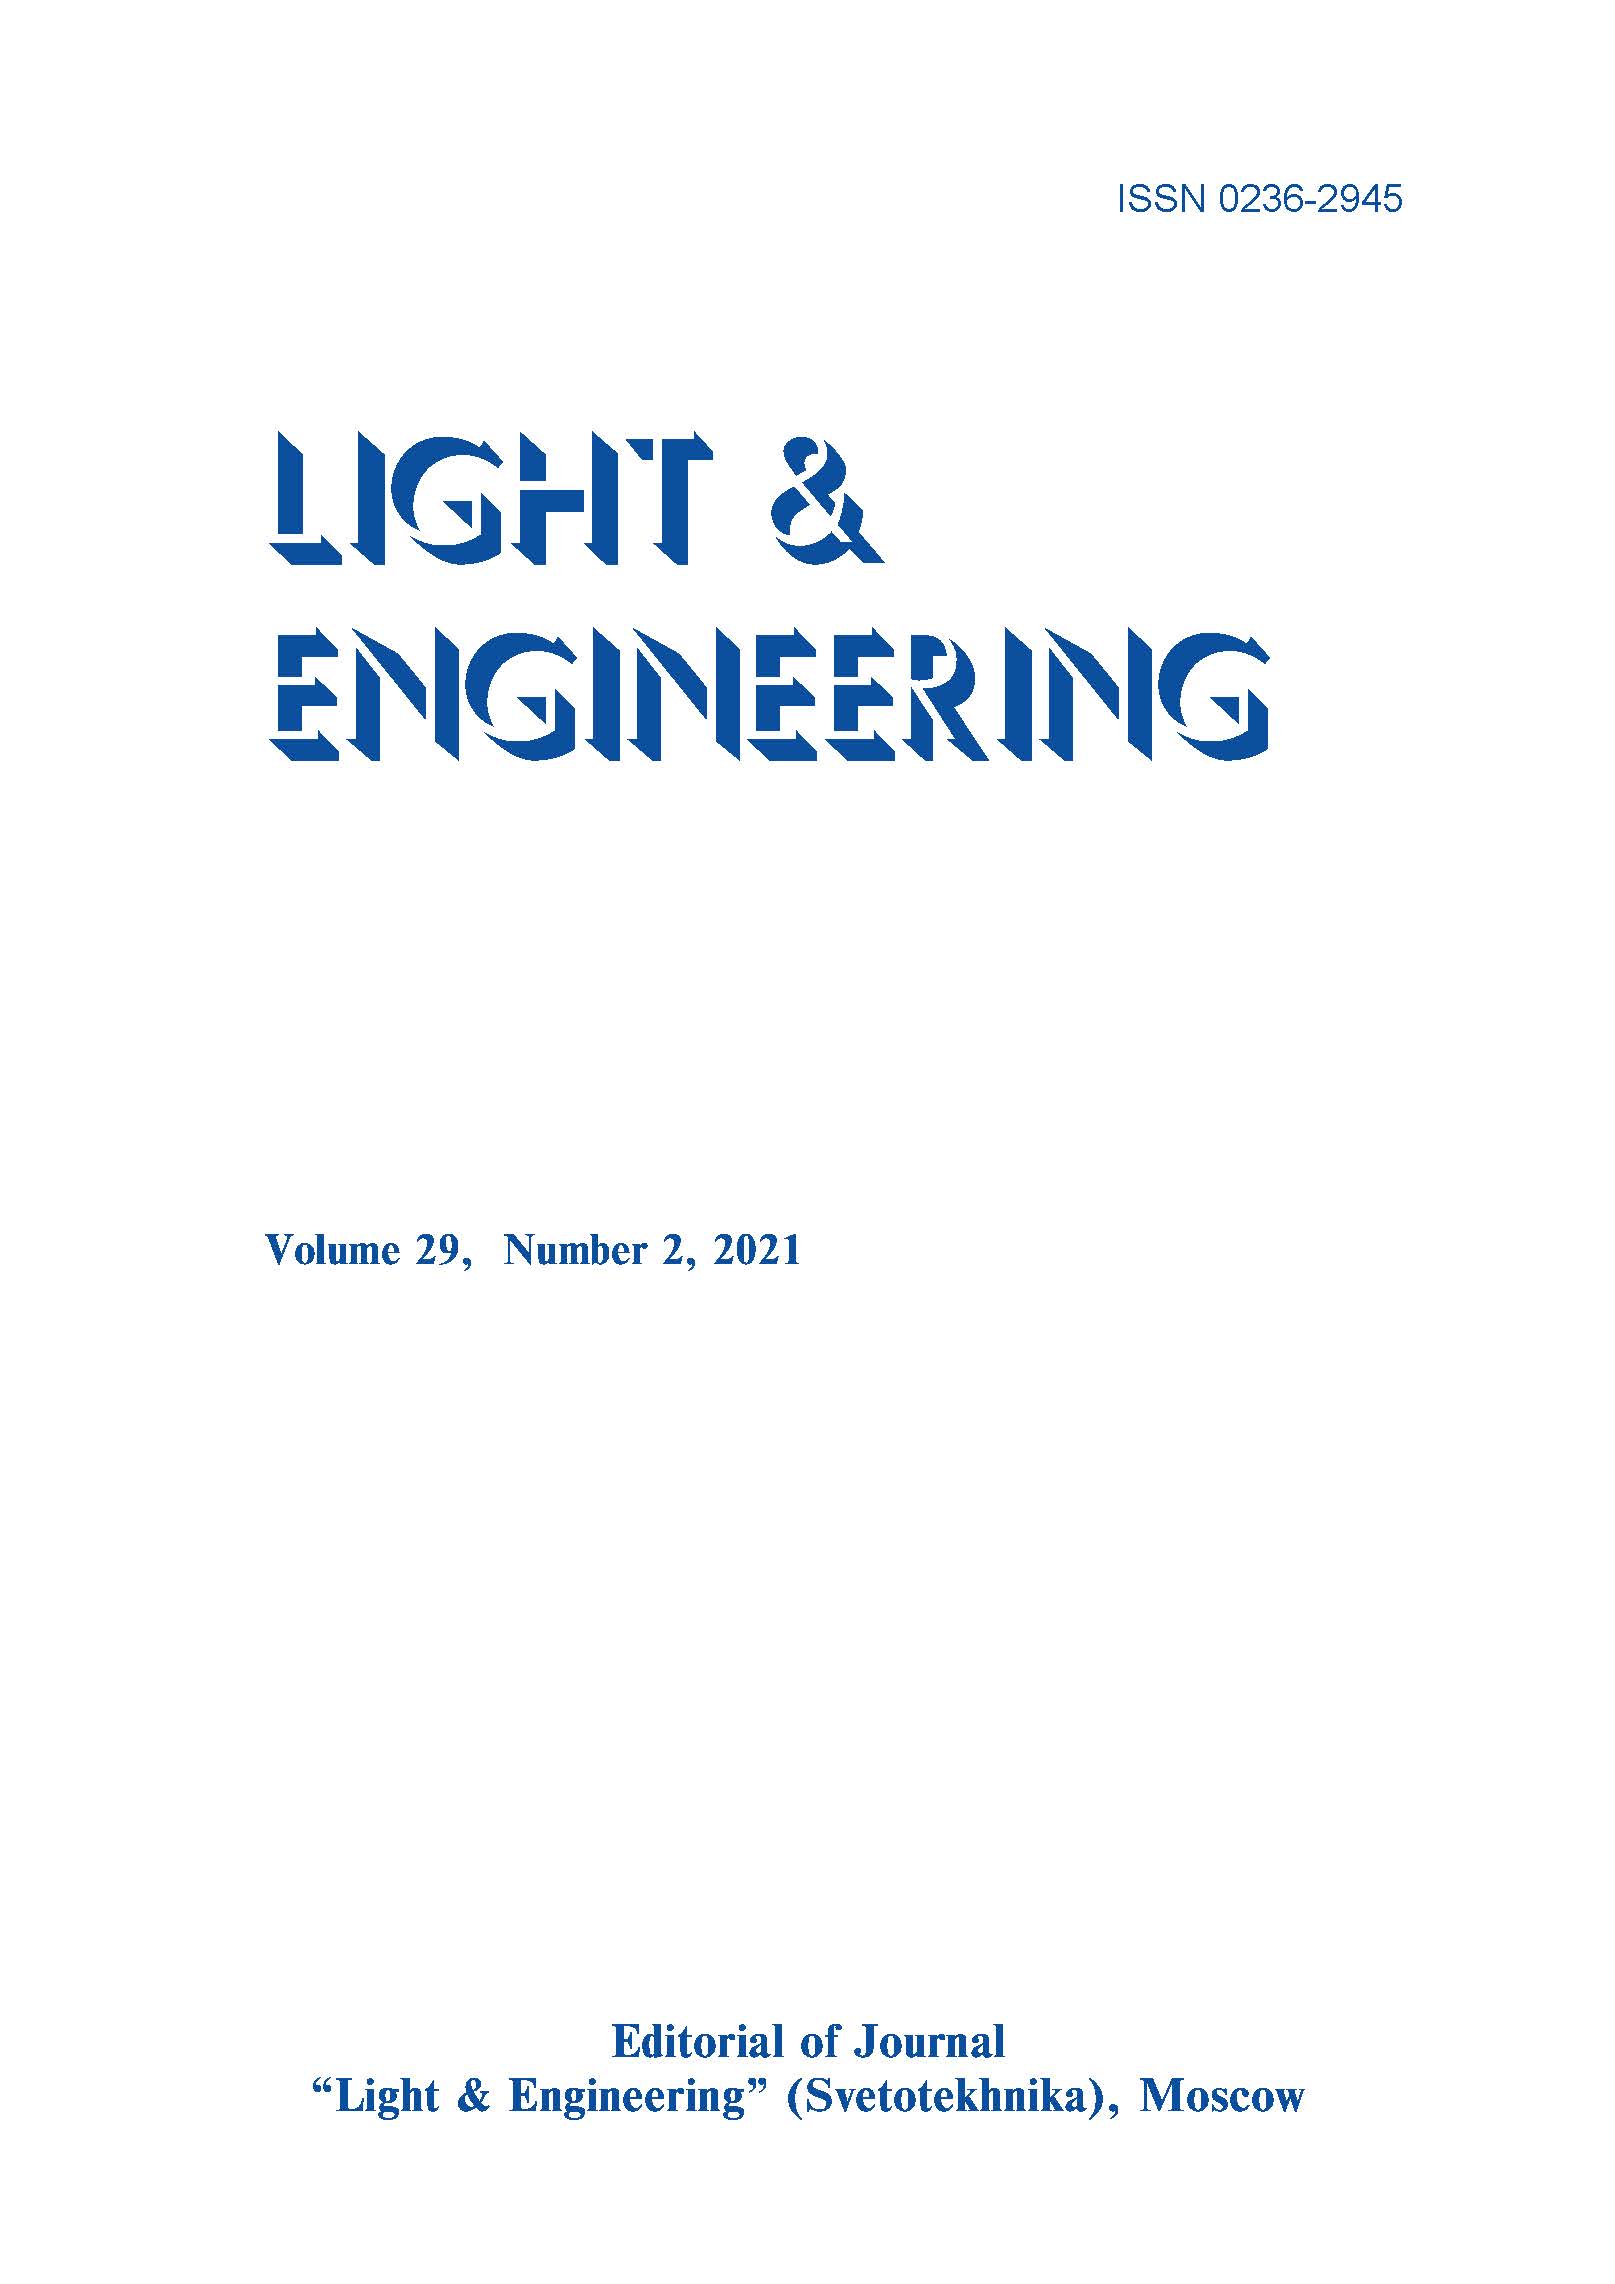 Introduction of a New Lighting Class for Motorized Roads in Indian Scenario L&E, Vol. 29, No. 2, 2021